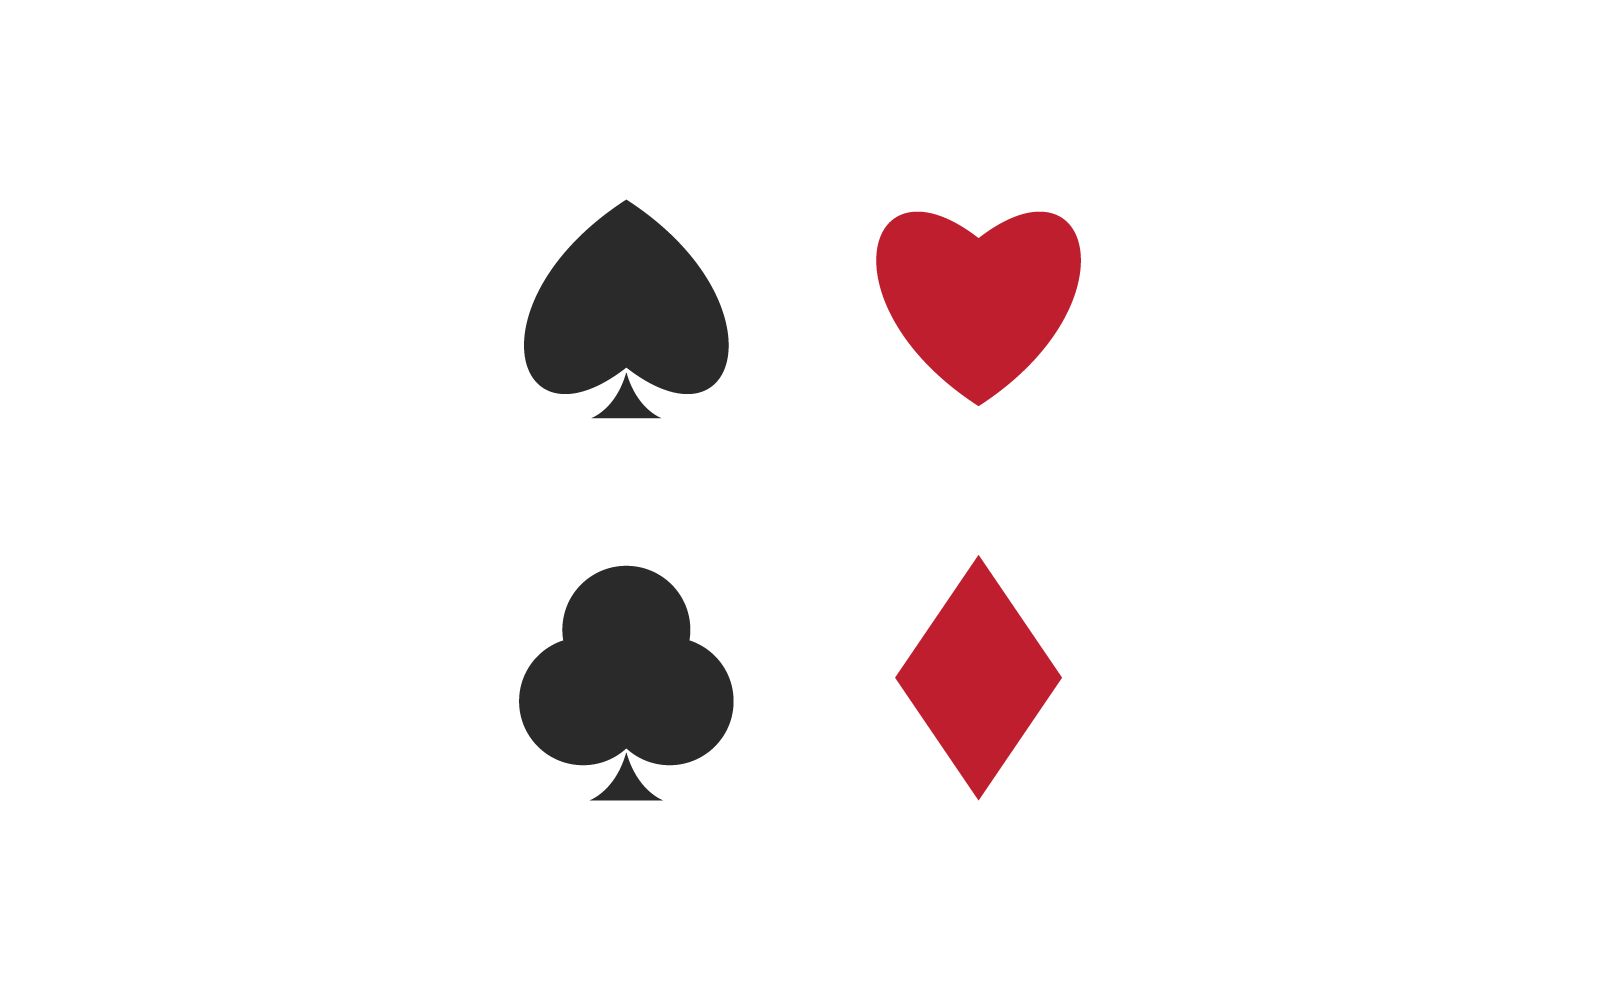 Playing card illustration design template